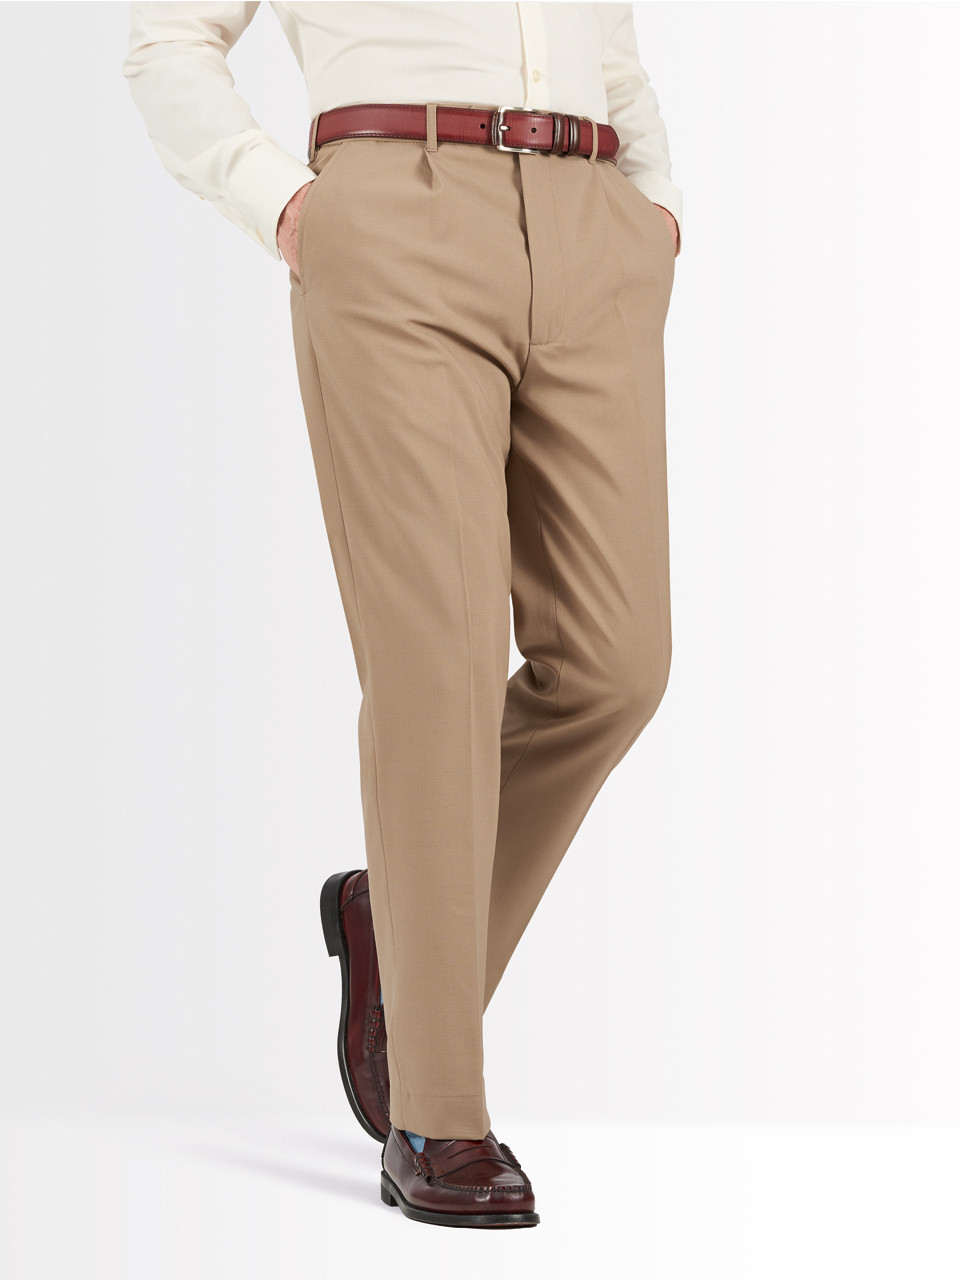 Buy UATHAYAM ARISER Brooklyn - Coffee Brown Cotton Lycra Trousers  TR19010(28) at Amazon.in